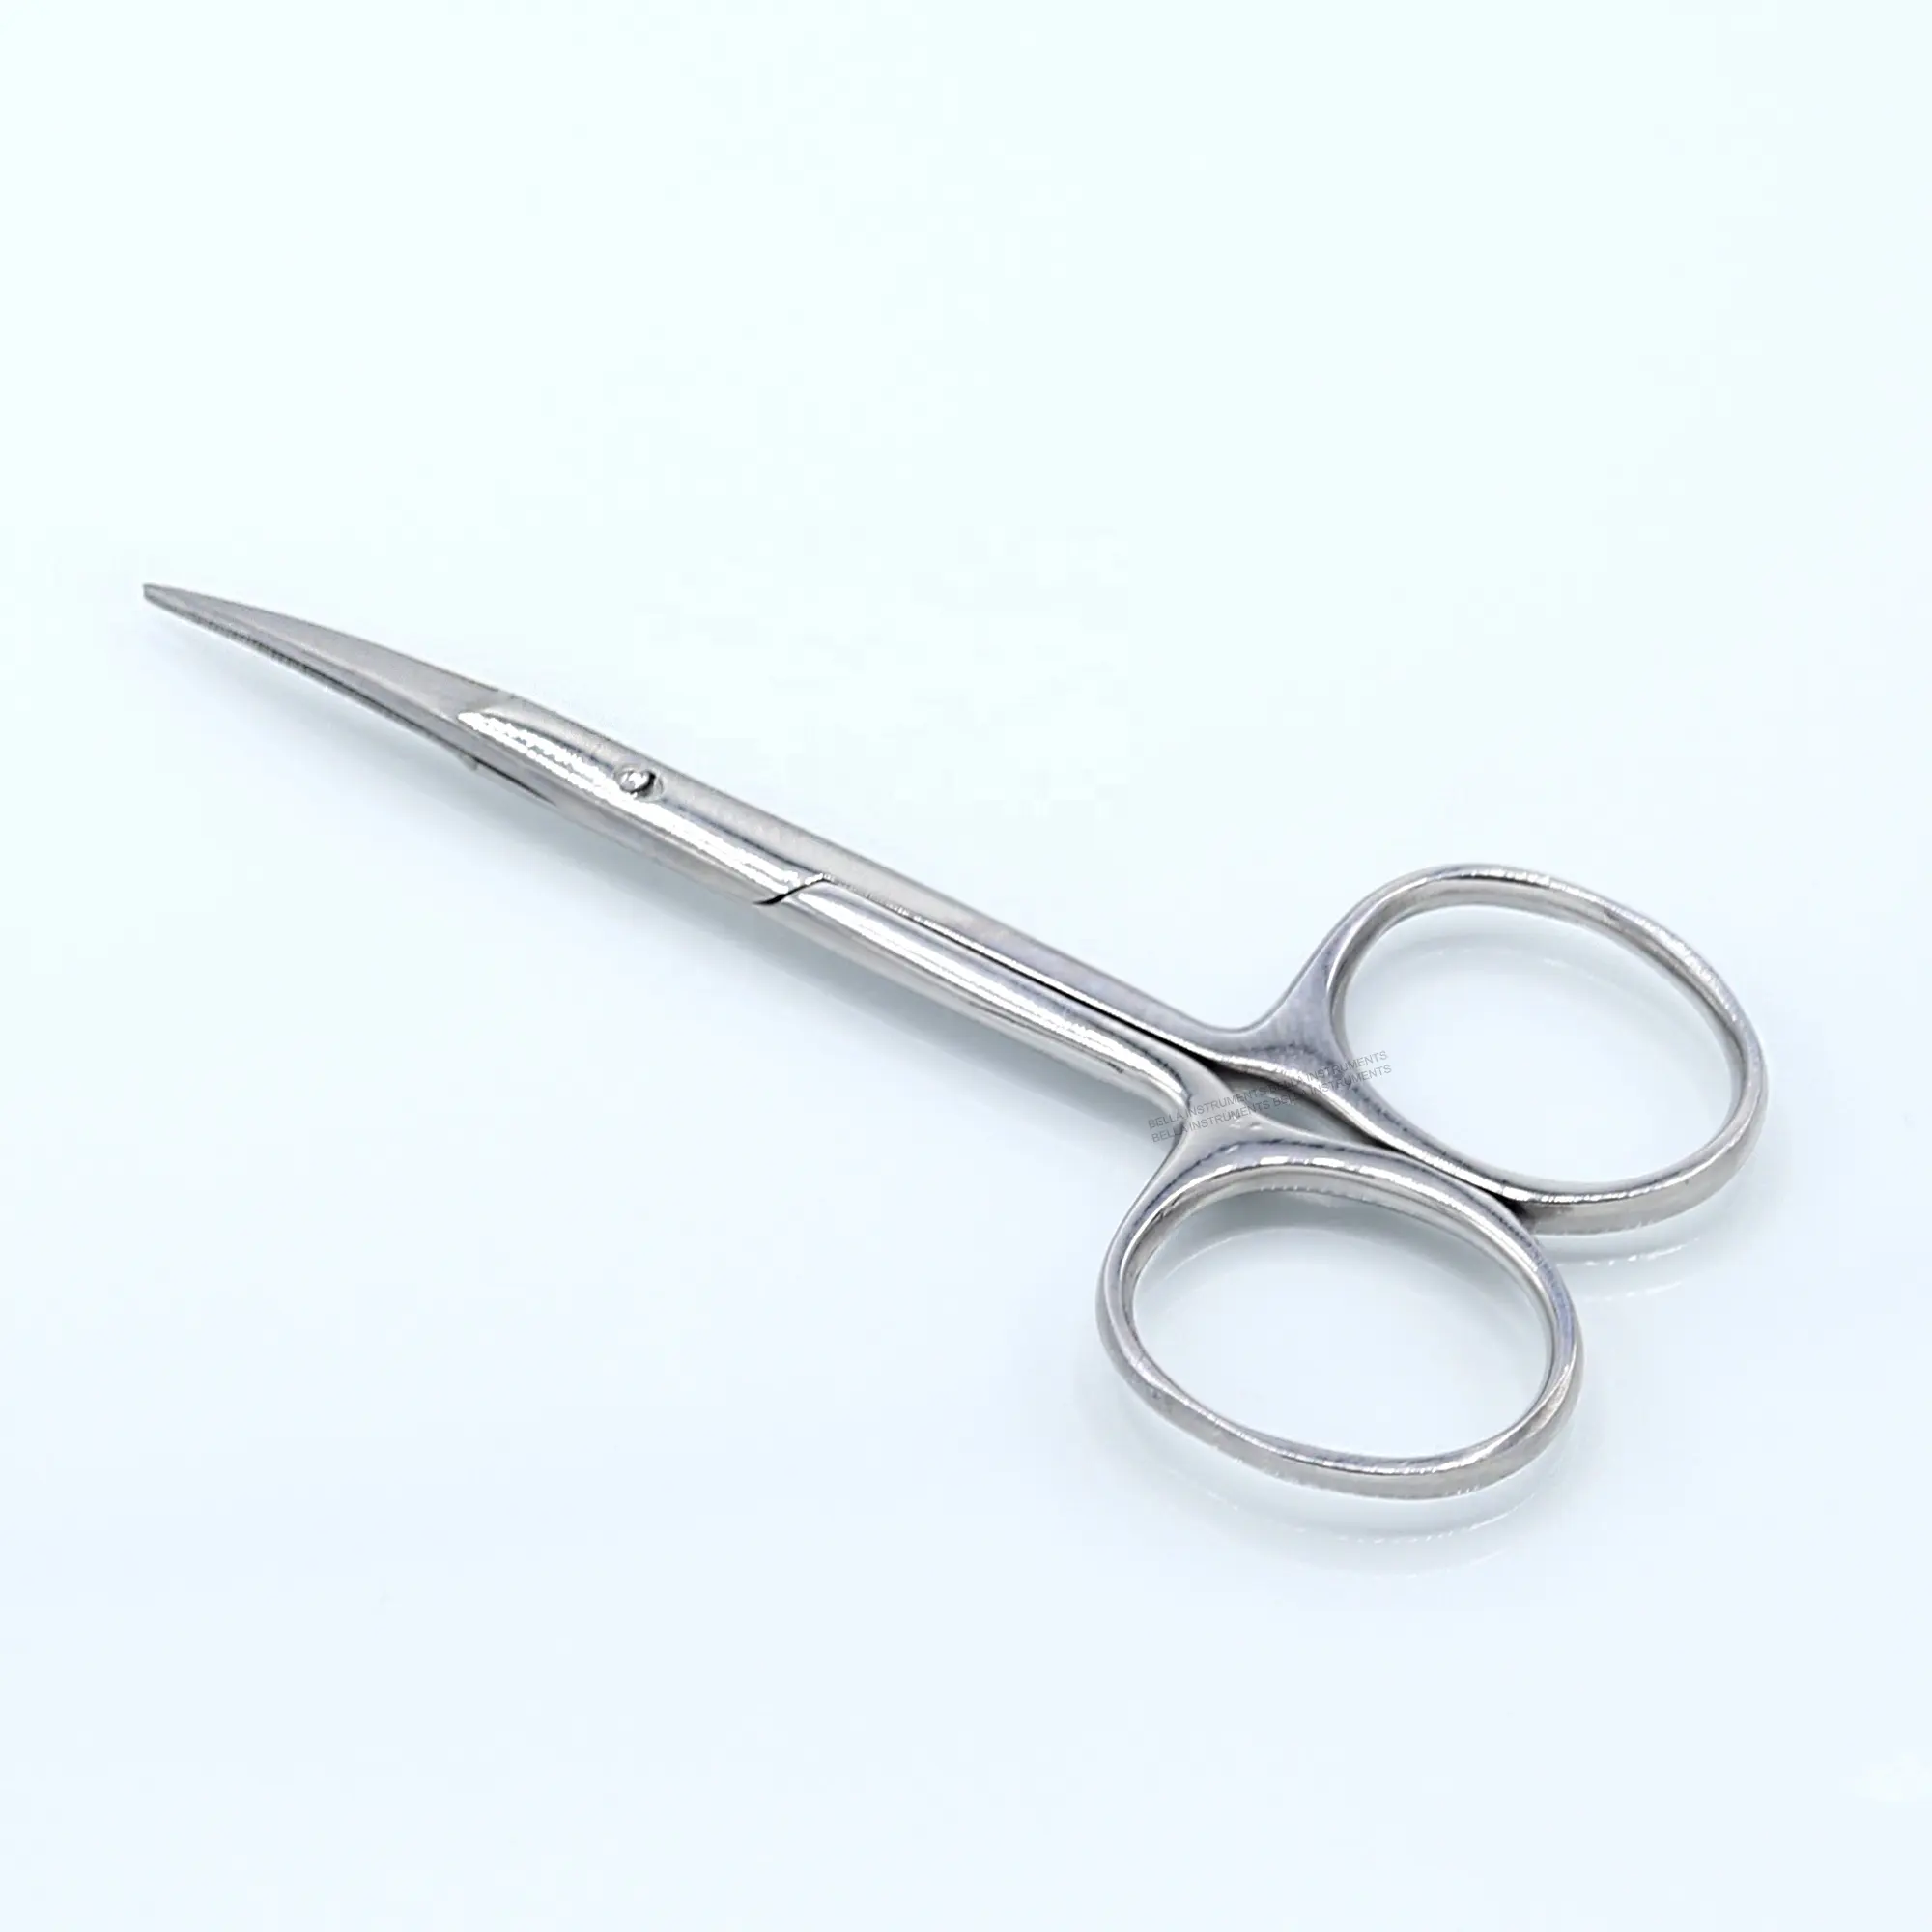 Stainless Steel Polish finish 4 Inch Cuticle Manicure Nail Scissors Curved Blades Popular Customize Bag Packaging